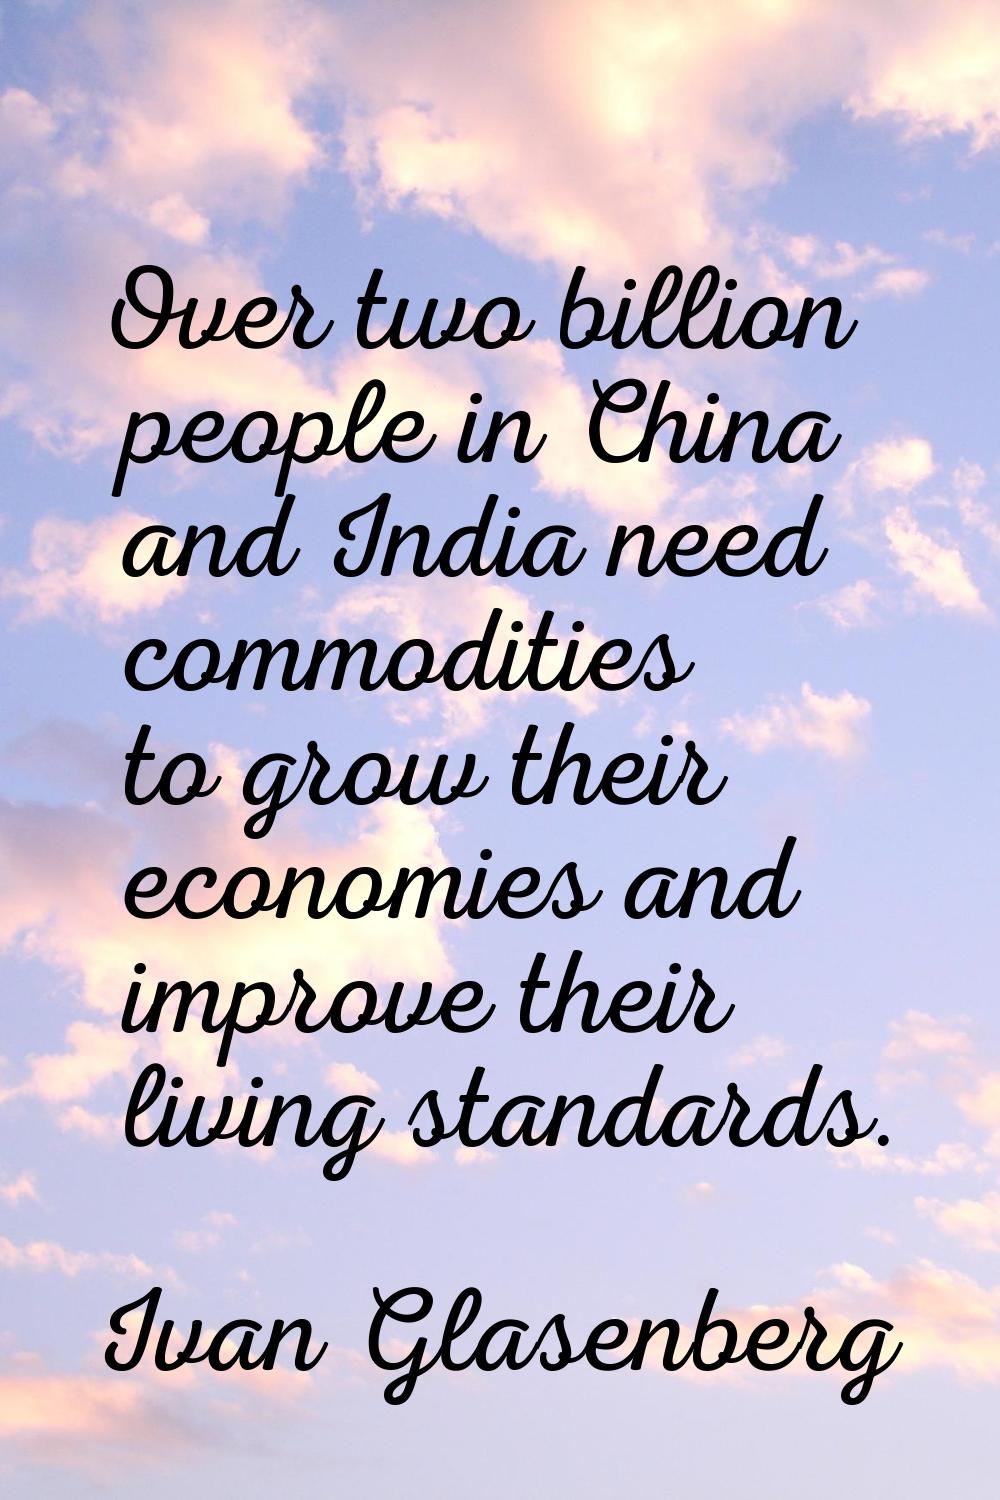 Over two billion people in China and India need commodities to grow their economies and improve the